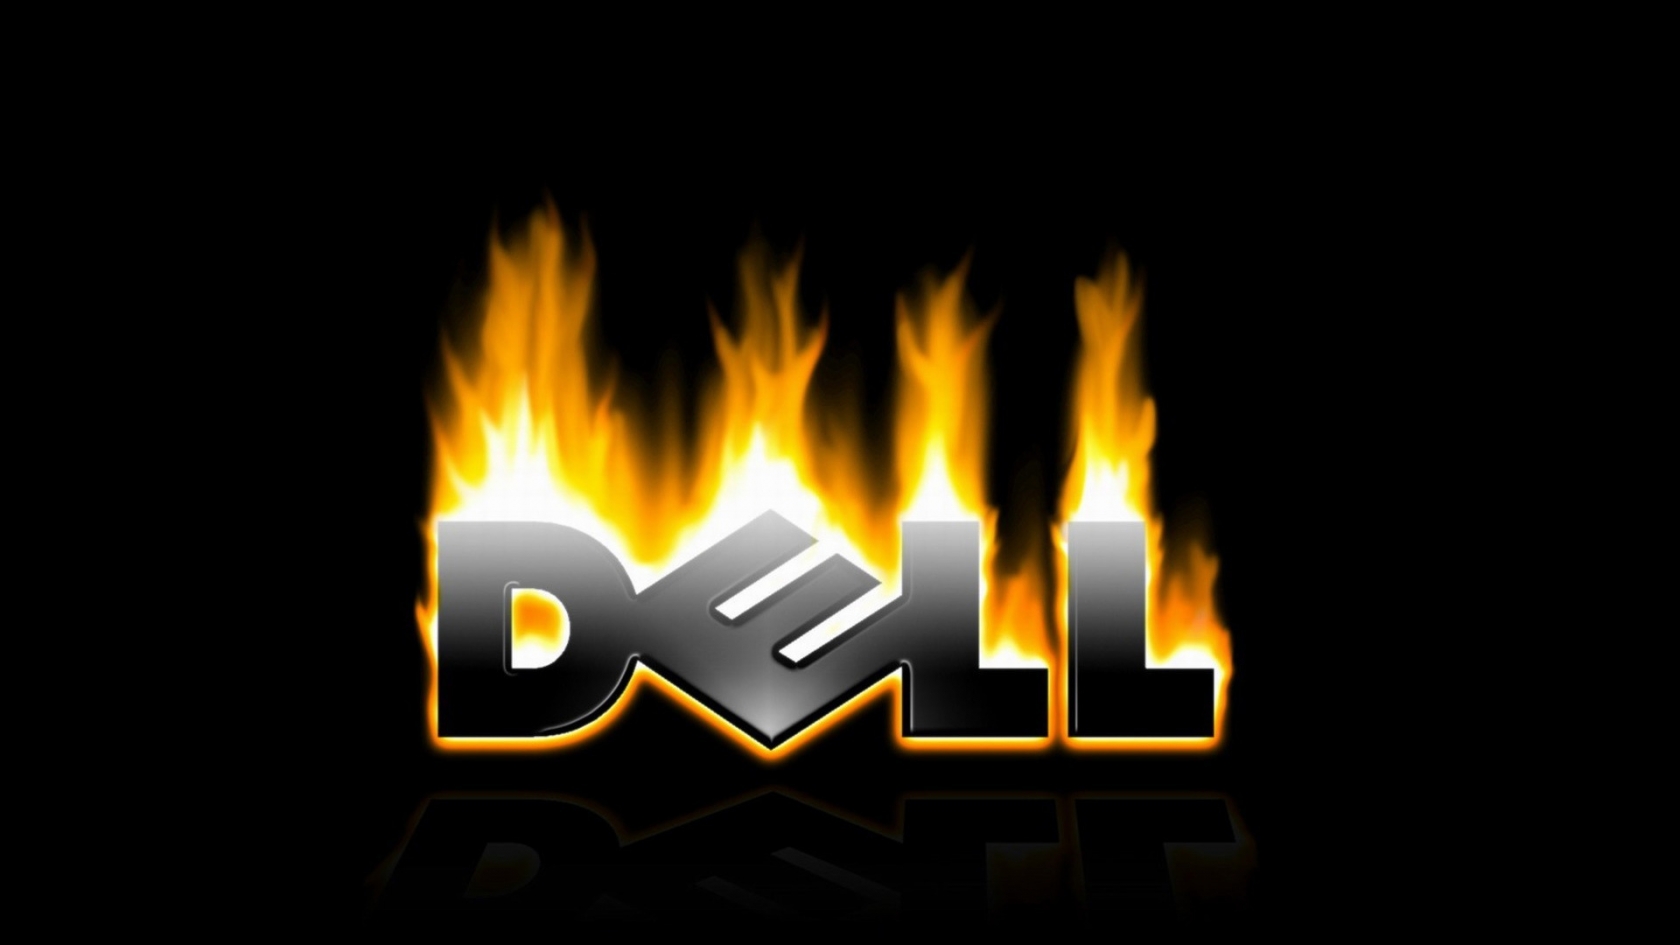 Dell in fire for 1680 x 945 HDTV resolution